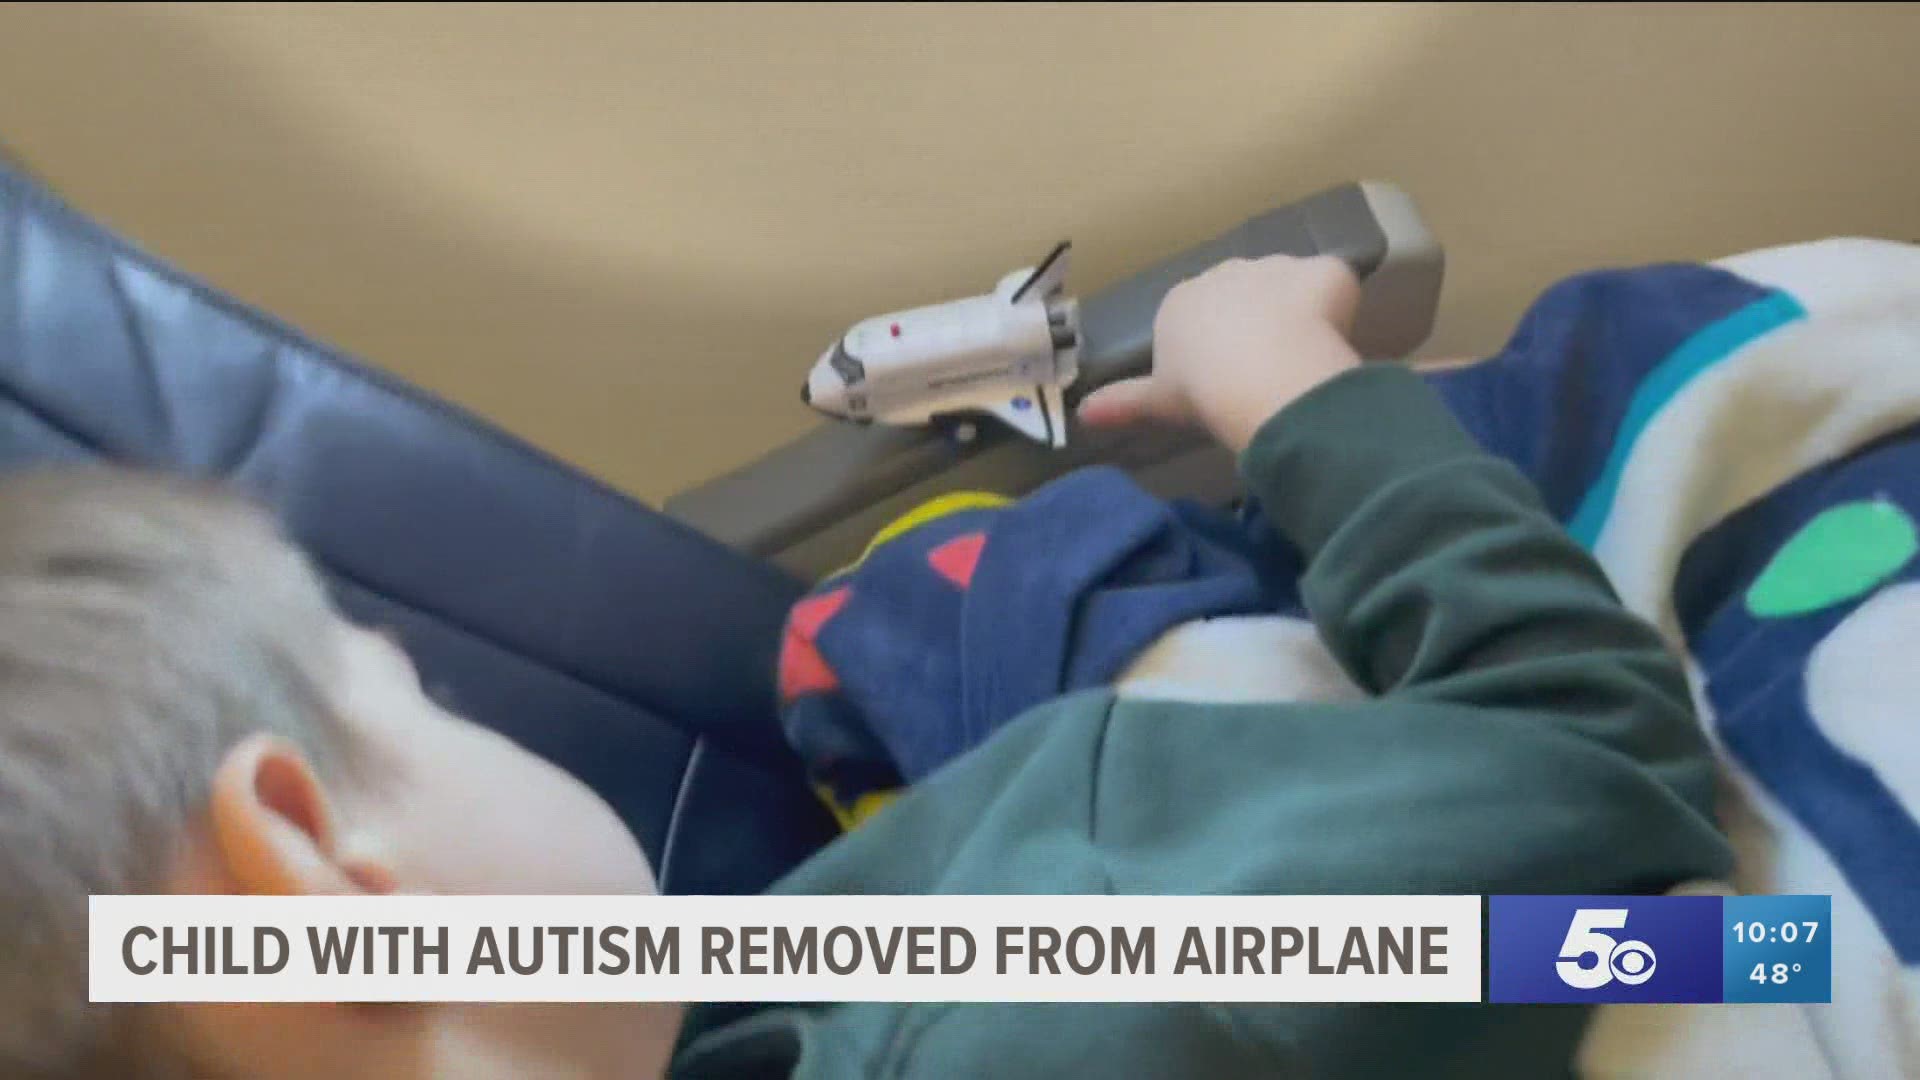 On a return flight home to Little Rock, the Kimball family was removed from a plane after their 4-year old son, who is non-verbal with autism, wasn't wearing a mask.